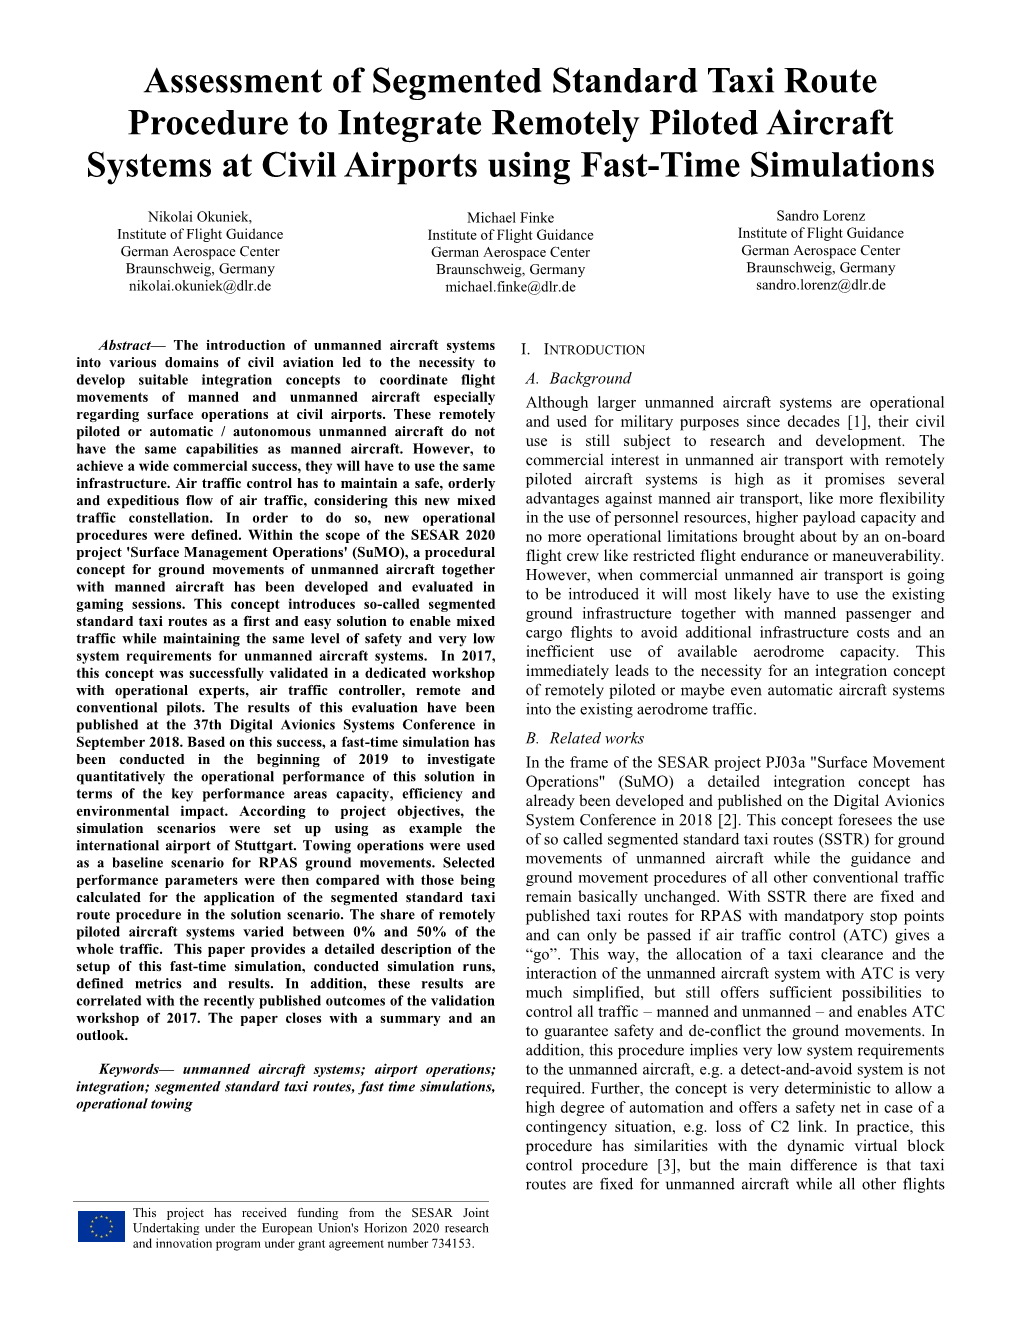 Assessment of Segmented Standard Taxi Route Procedure to Integrate Remotely Piloted Aircraft Systems at Civil Airports Using Fast-Time Simulations